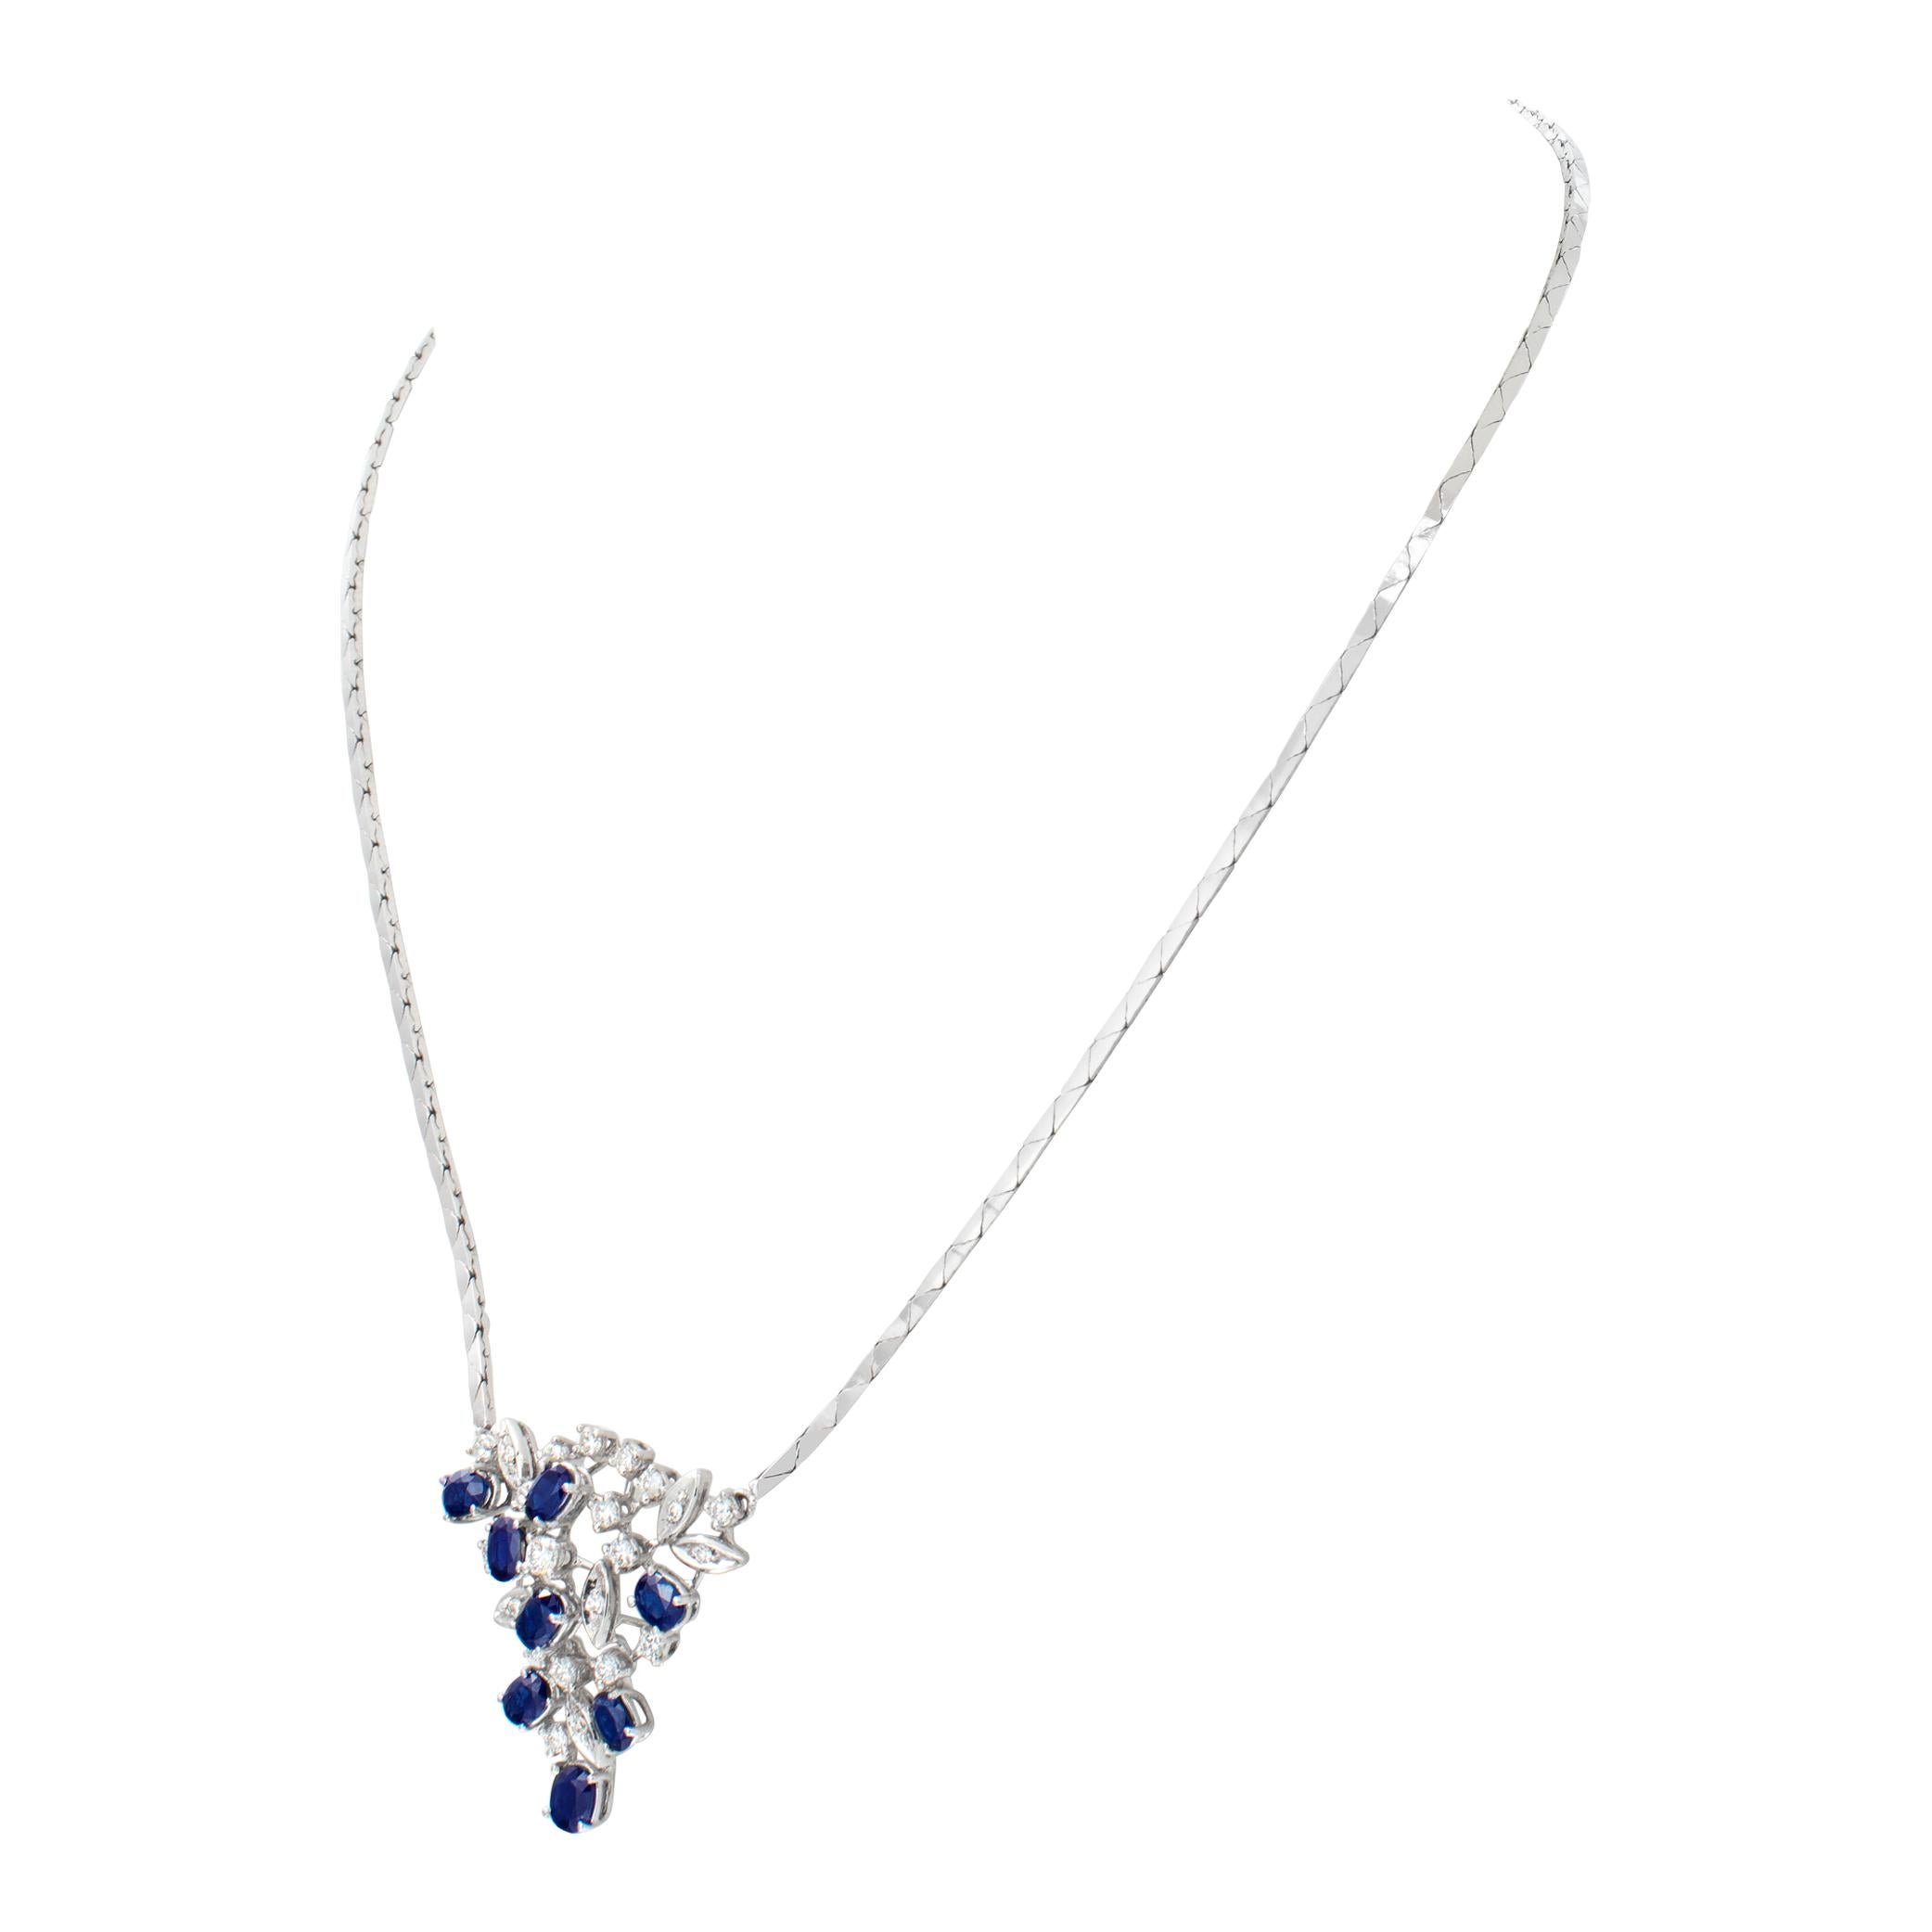 Drop pendant necklace in 18k white gold with diamonds and sapphires, with approx. 2.50 carats in blue sapphires and 1 carat in round diamonds G-H color, VS-SI clarity. Length 16 inches.
